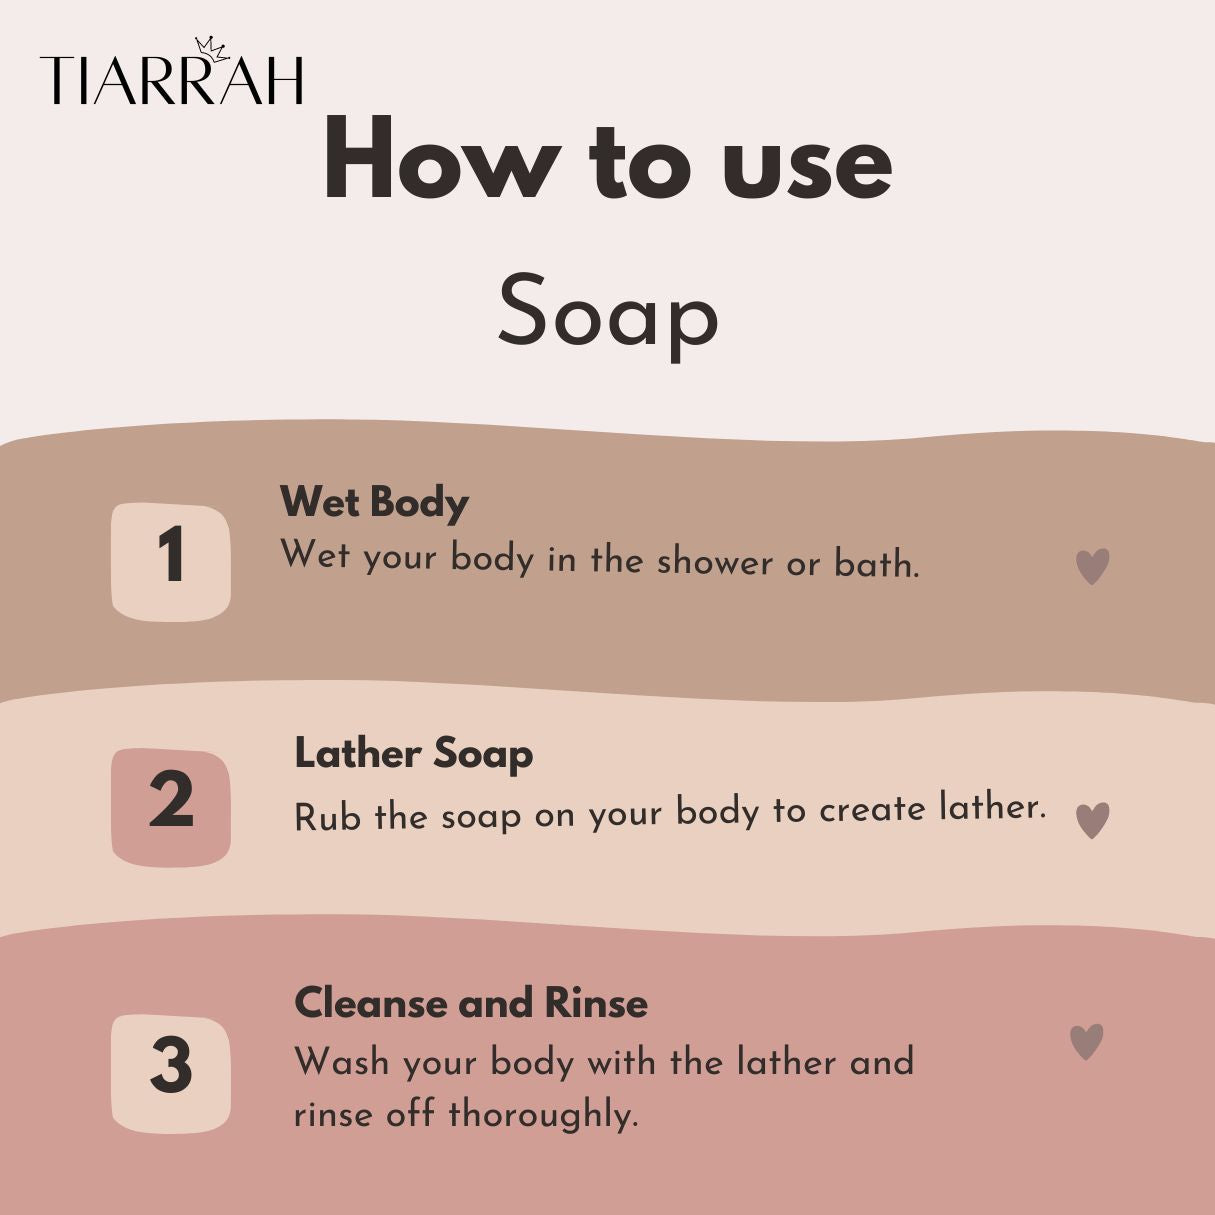 Tiarrah's Lavender and Ylang Ylang Soap: Pure, Safe, Relaxing - The Luxury Bath and Body Care Shop